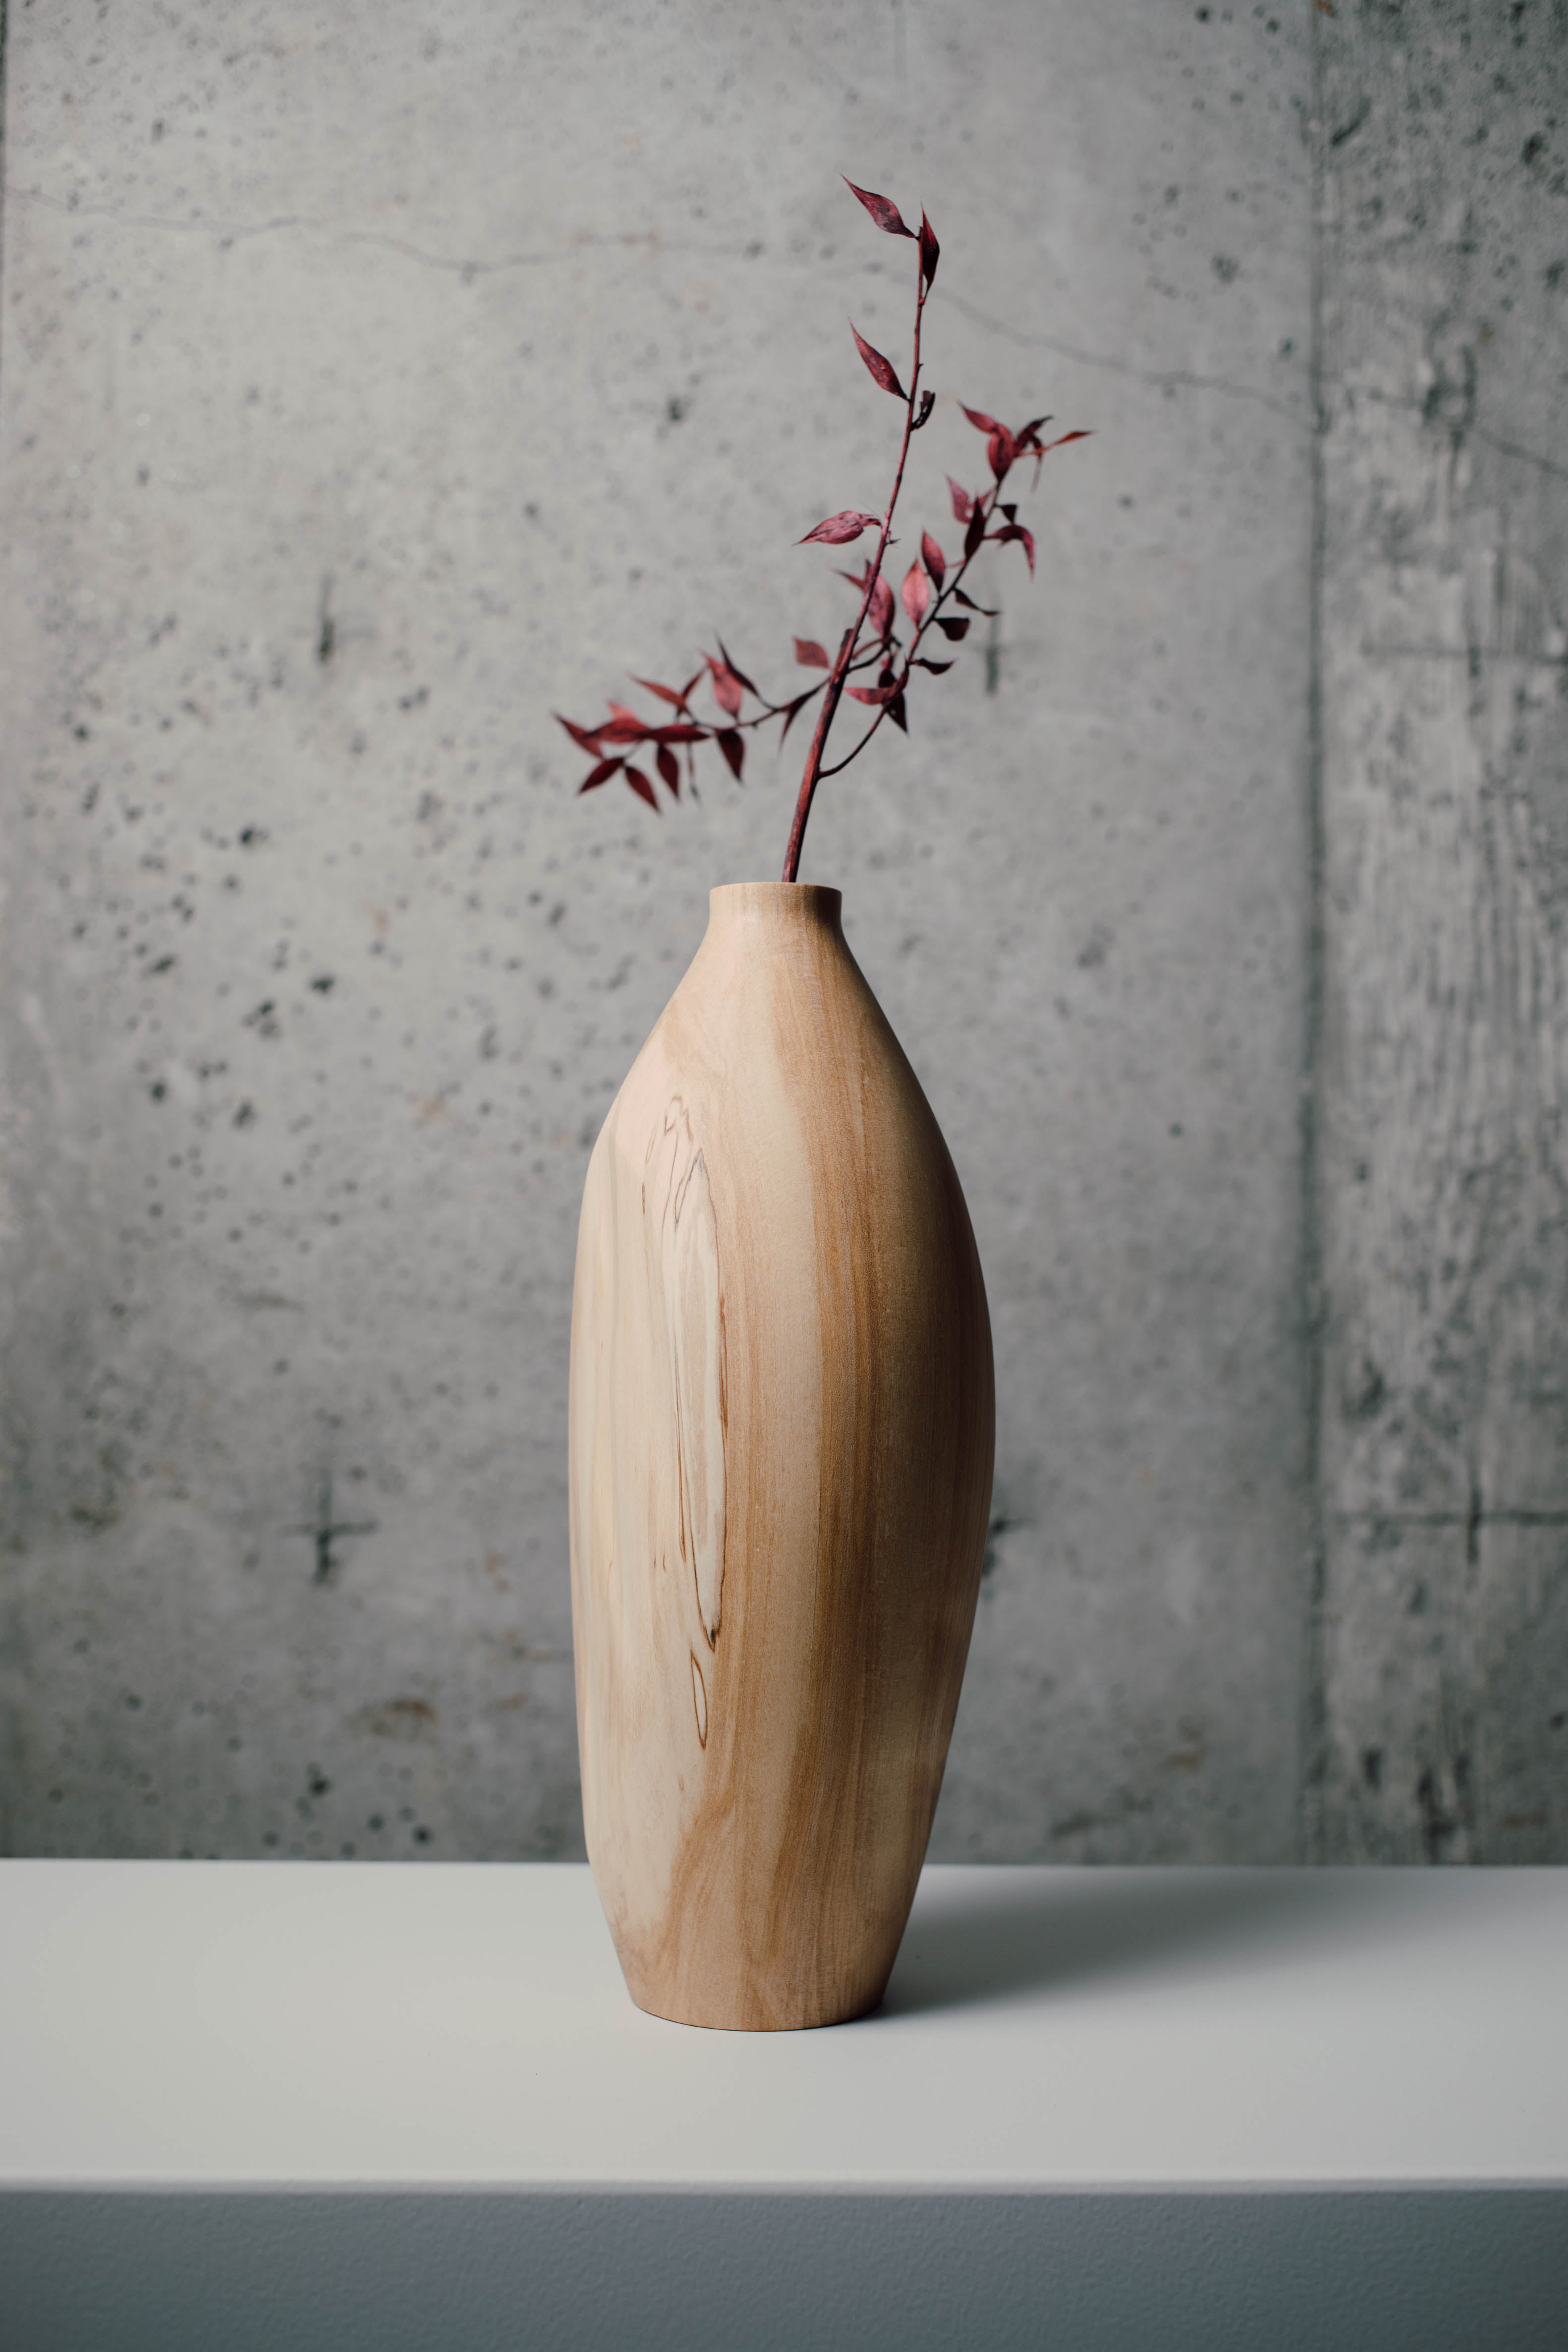 Handmade wooden vase canada. Used with dried flowers.